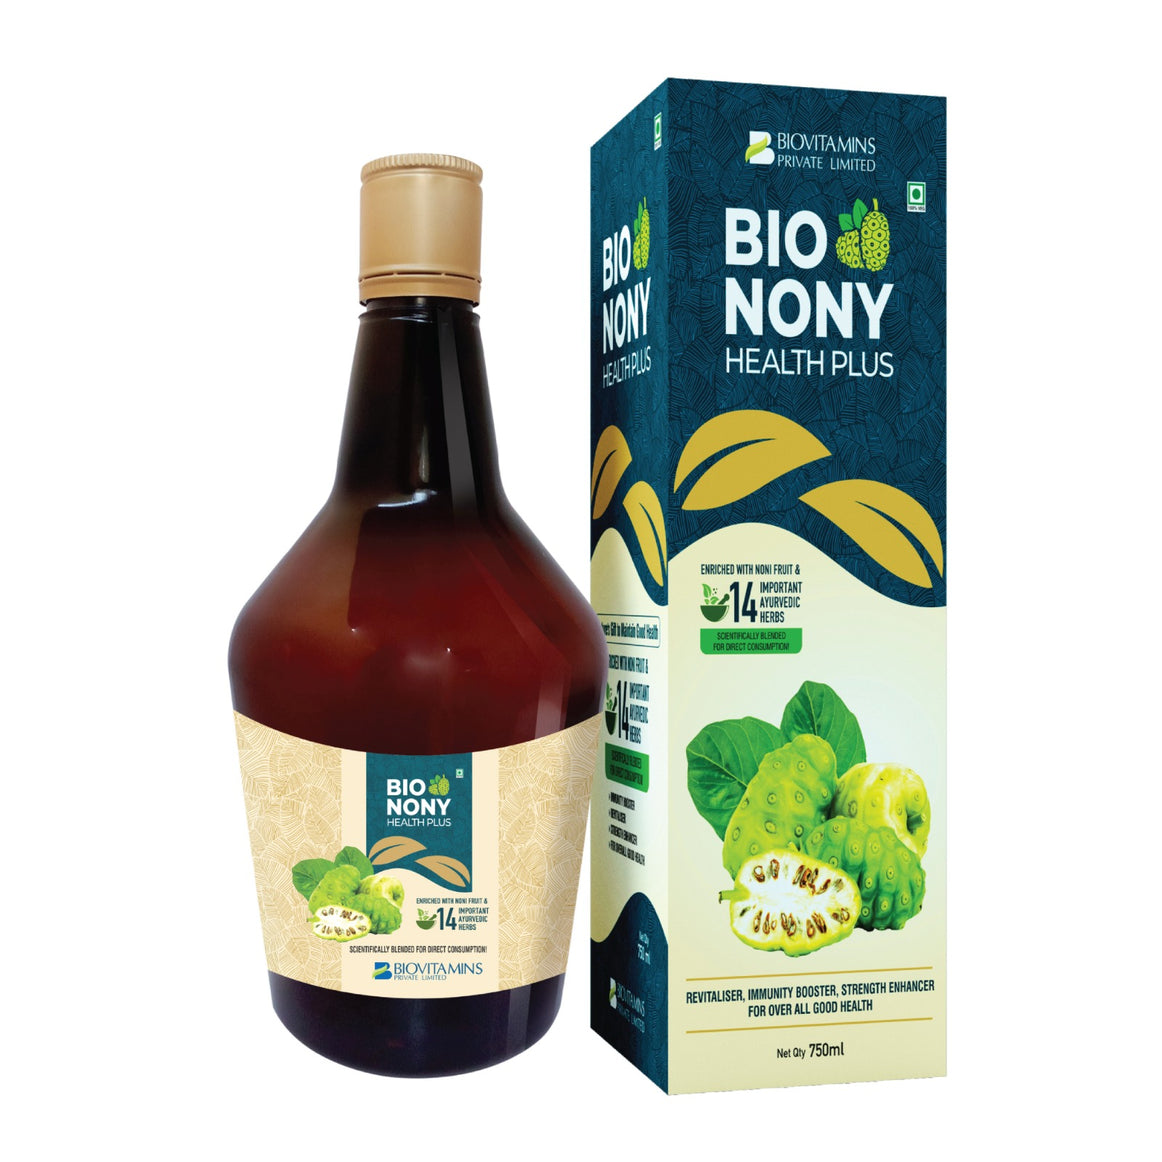 BIONONY HEALTH PLUS - Health Supplement and Immunity Booster